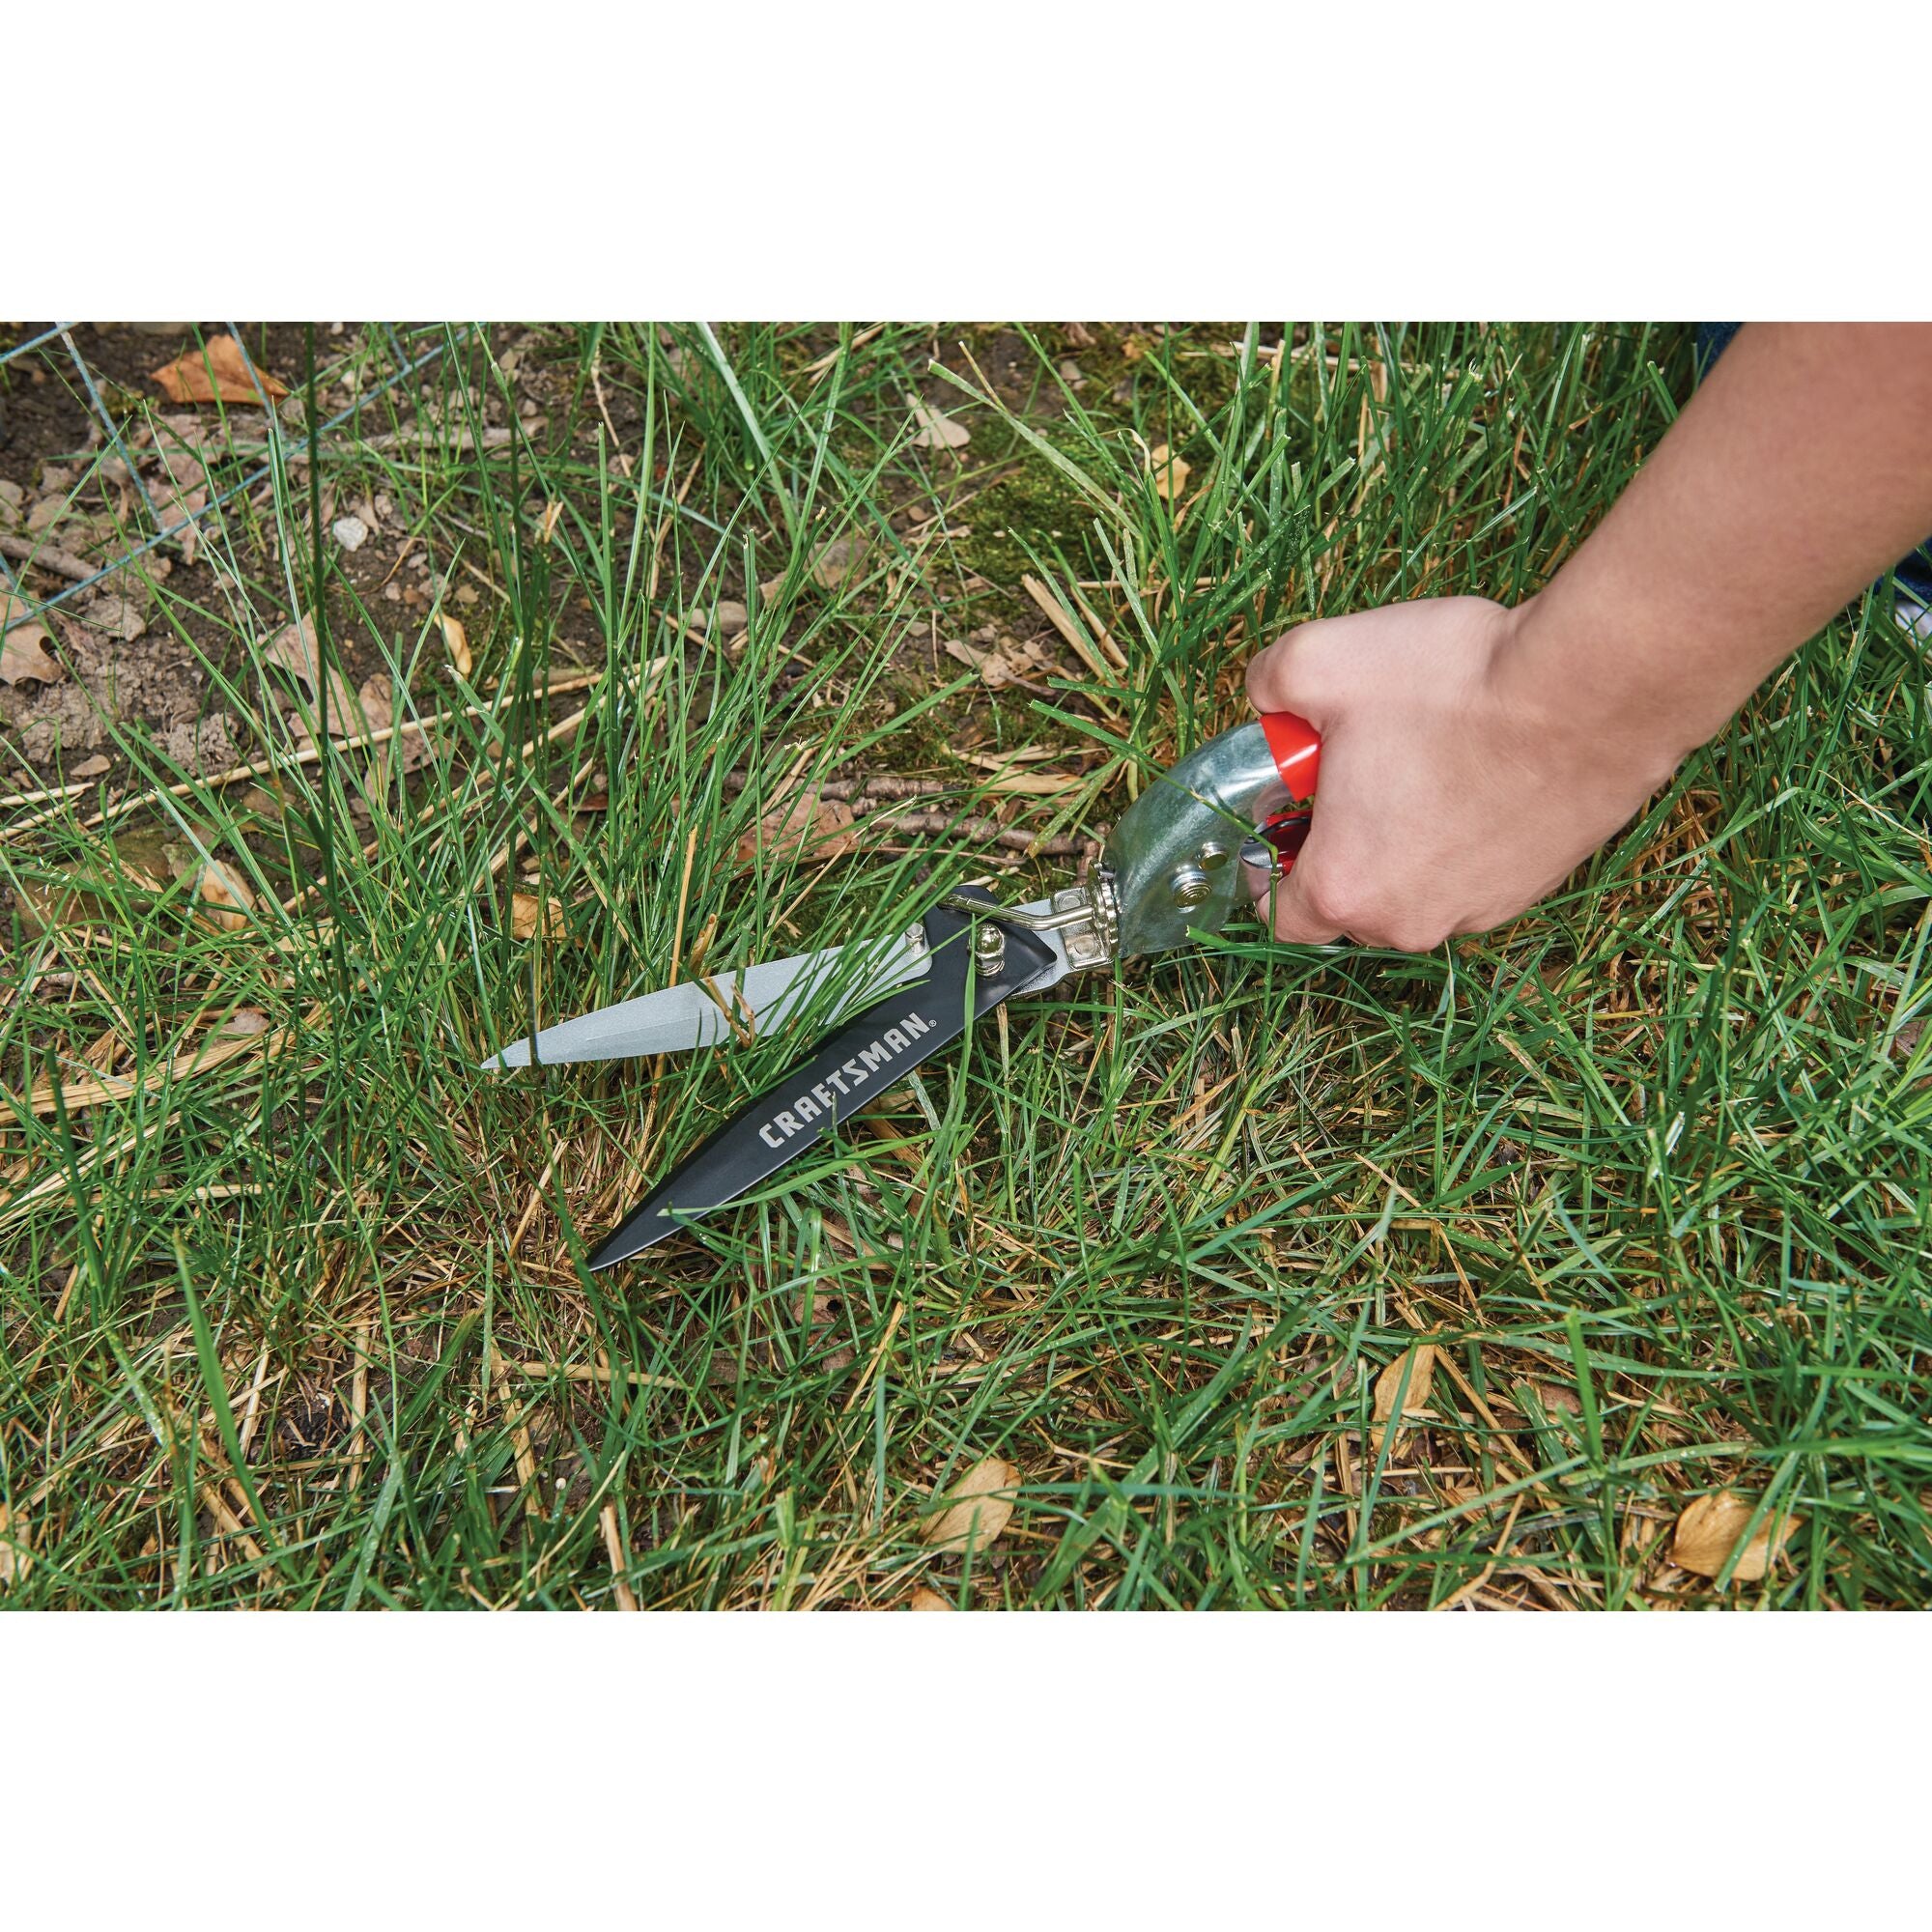 Swivel grass shears being used by a person to trim grass outdoors.